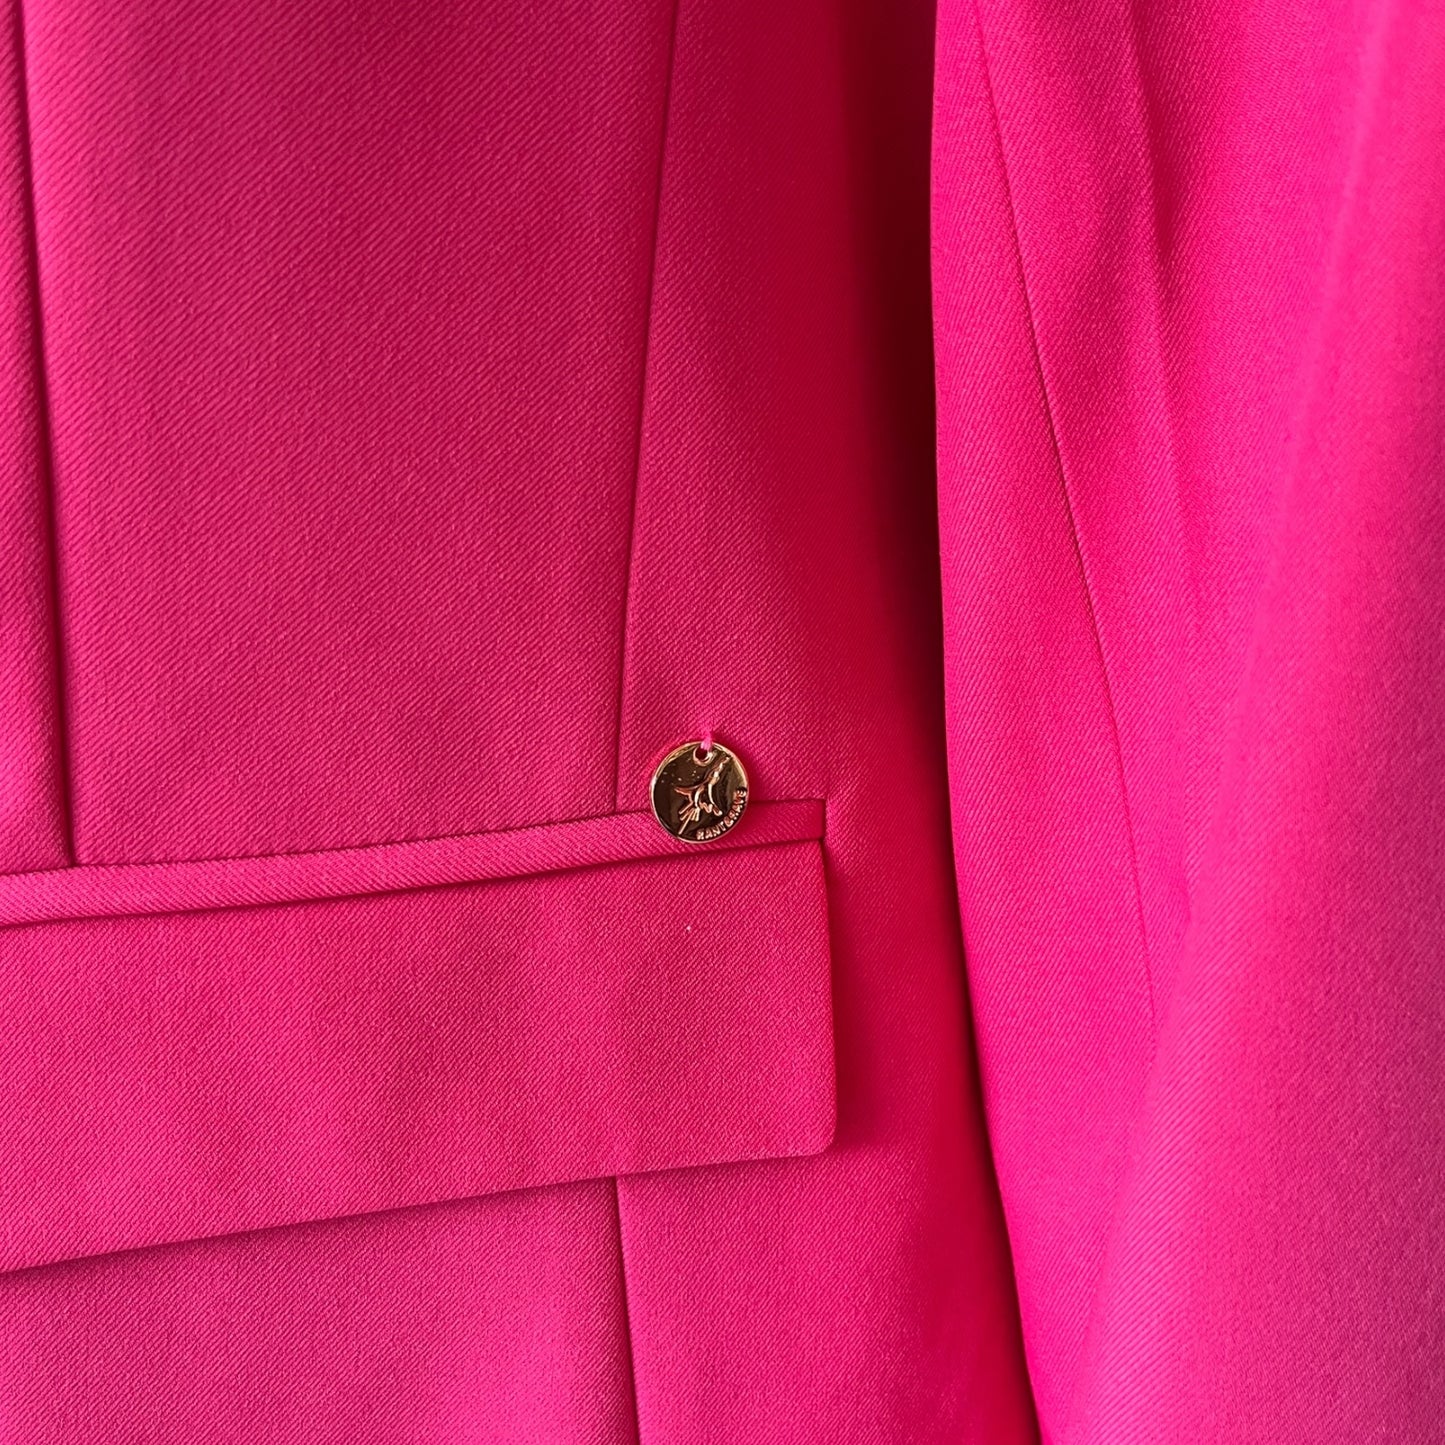 Rant and Rave Pink Trouser Suit - 10